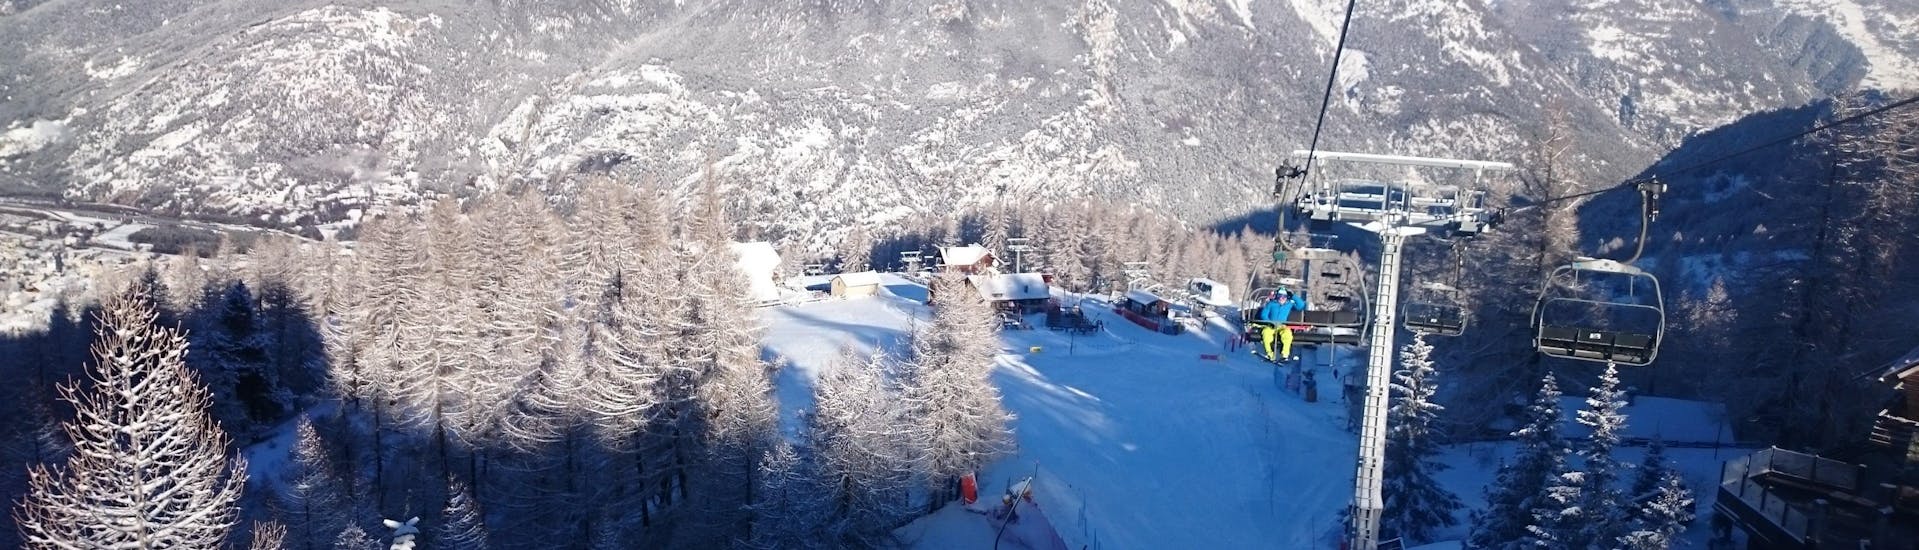 An image of a chair lift in the Italian ski resort of Sauze d'Oulx, where local ski schools take people for their ski lessons.